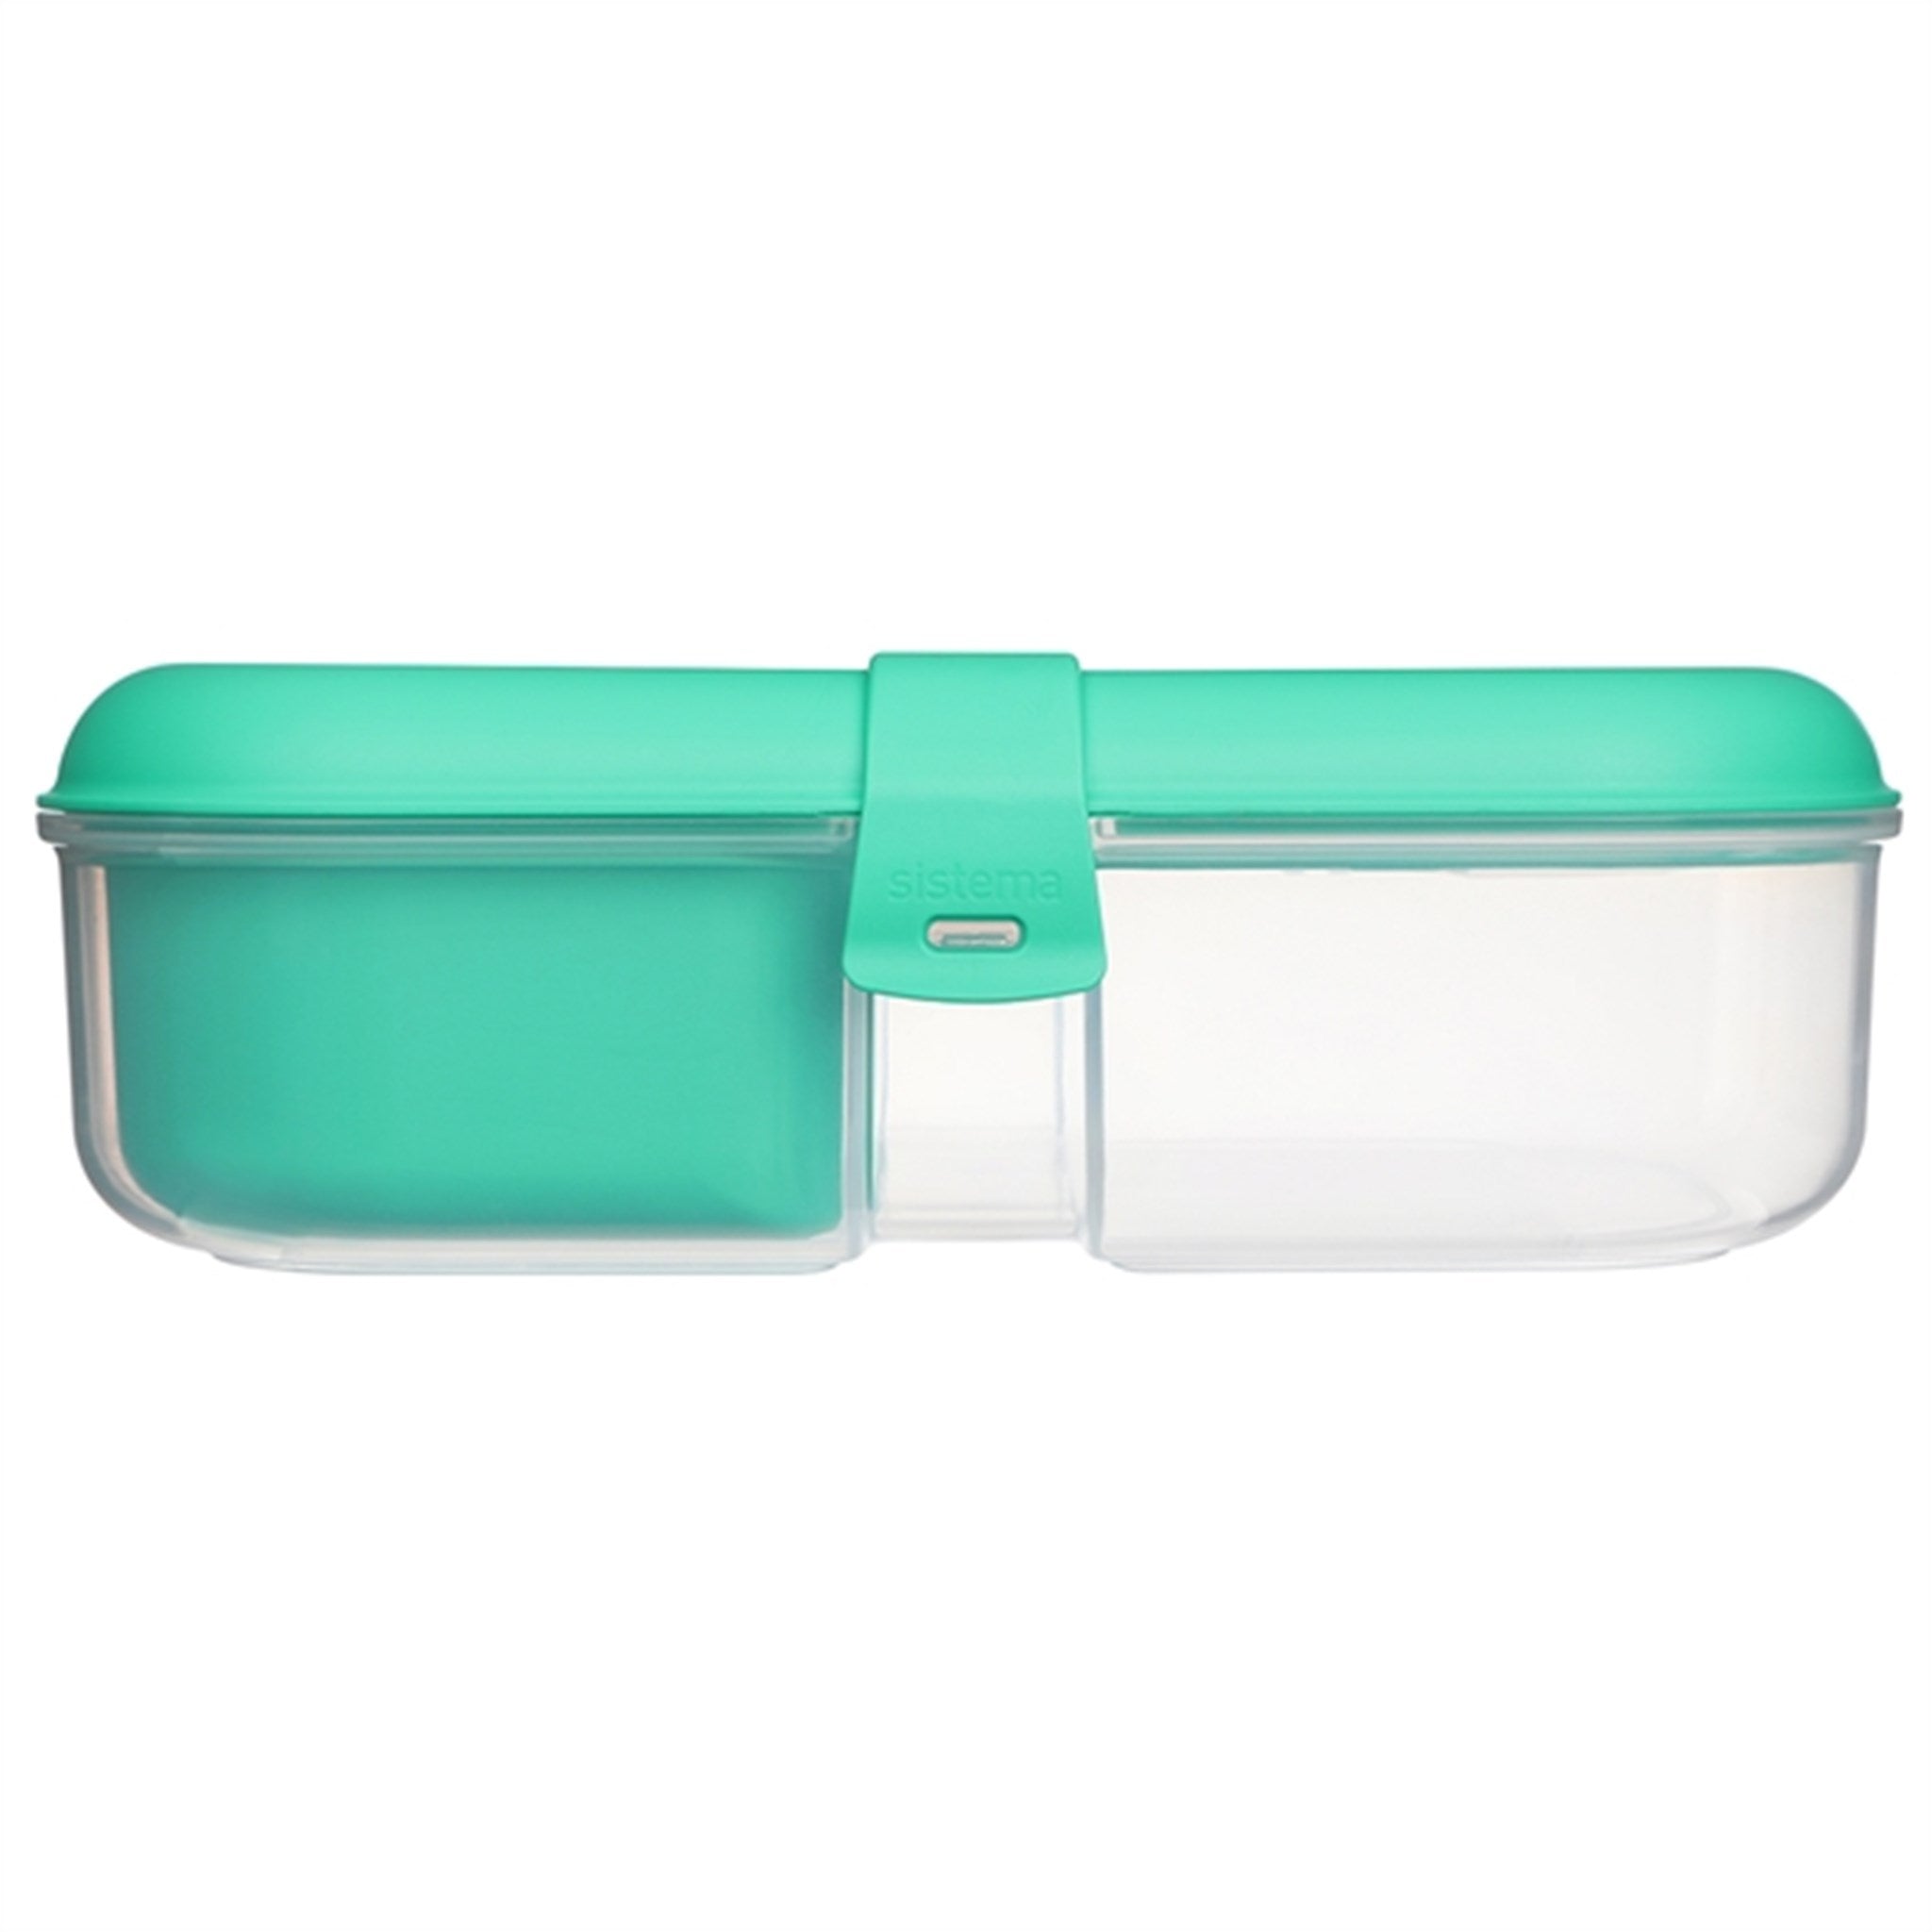 Sistema To Go Ribbon Lunch Box 1,1 L Minty Teal 2